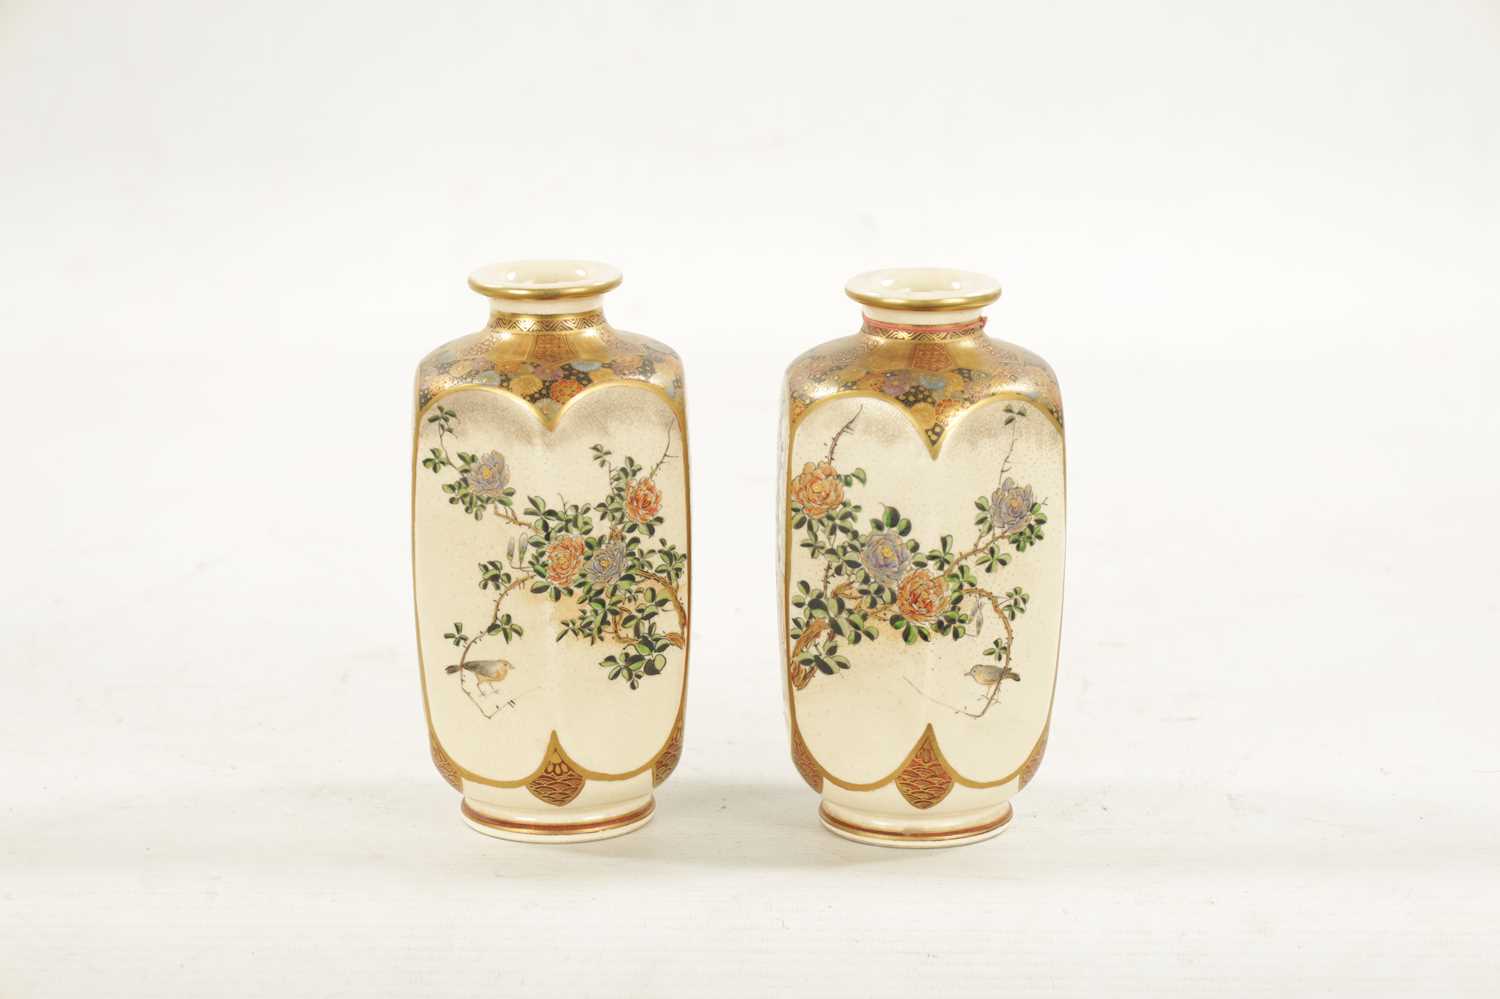 A FINE PAIR OF JAPANESE MEIJI PERIOD SATSUMA CABINET VASES - Image 6 of 8